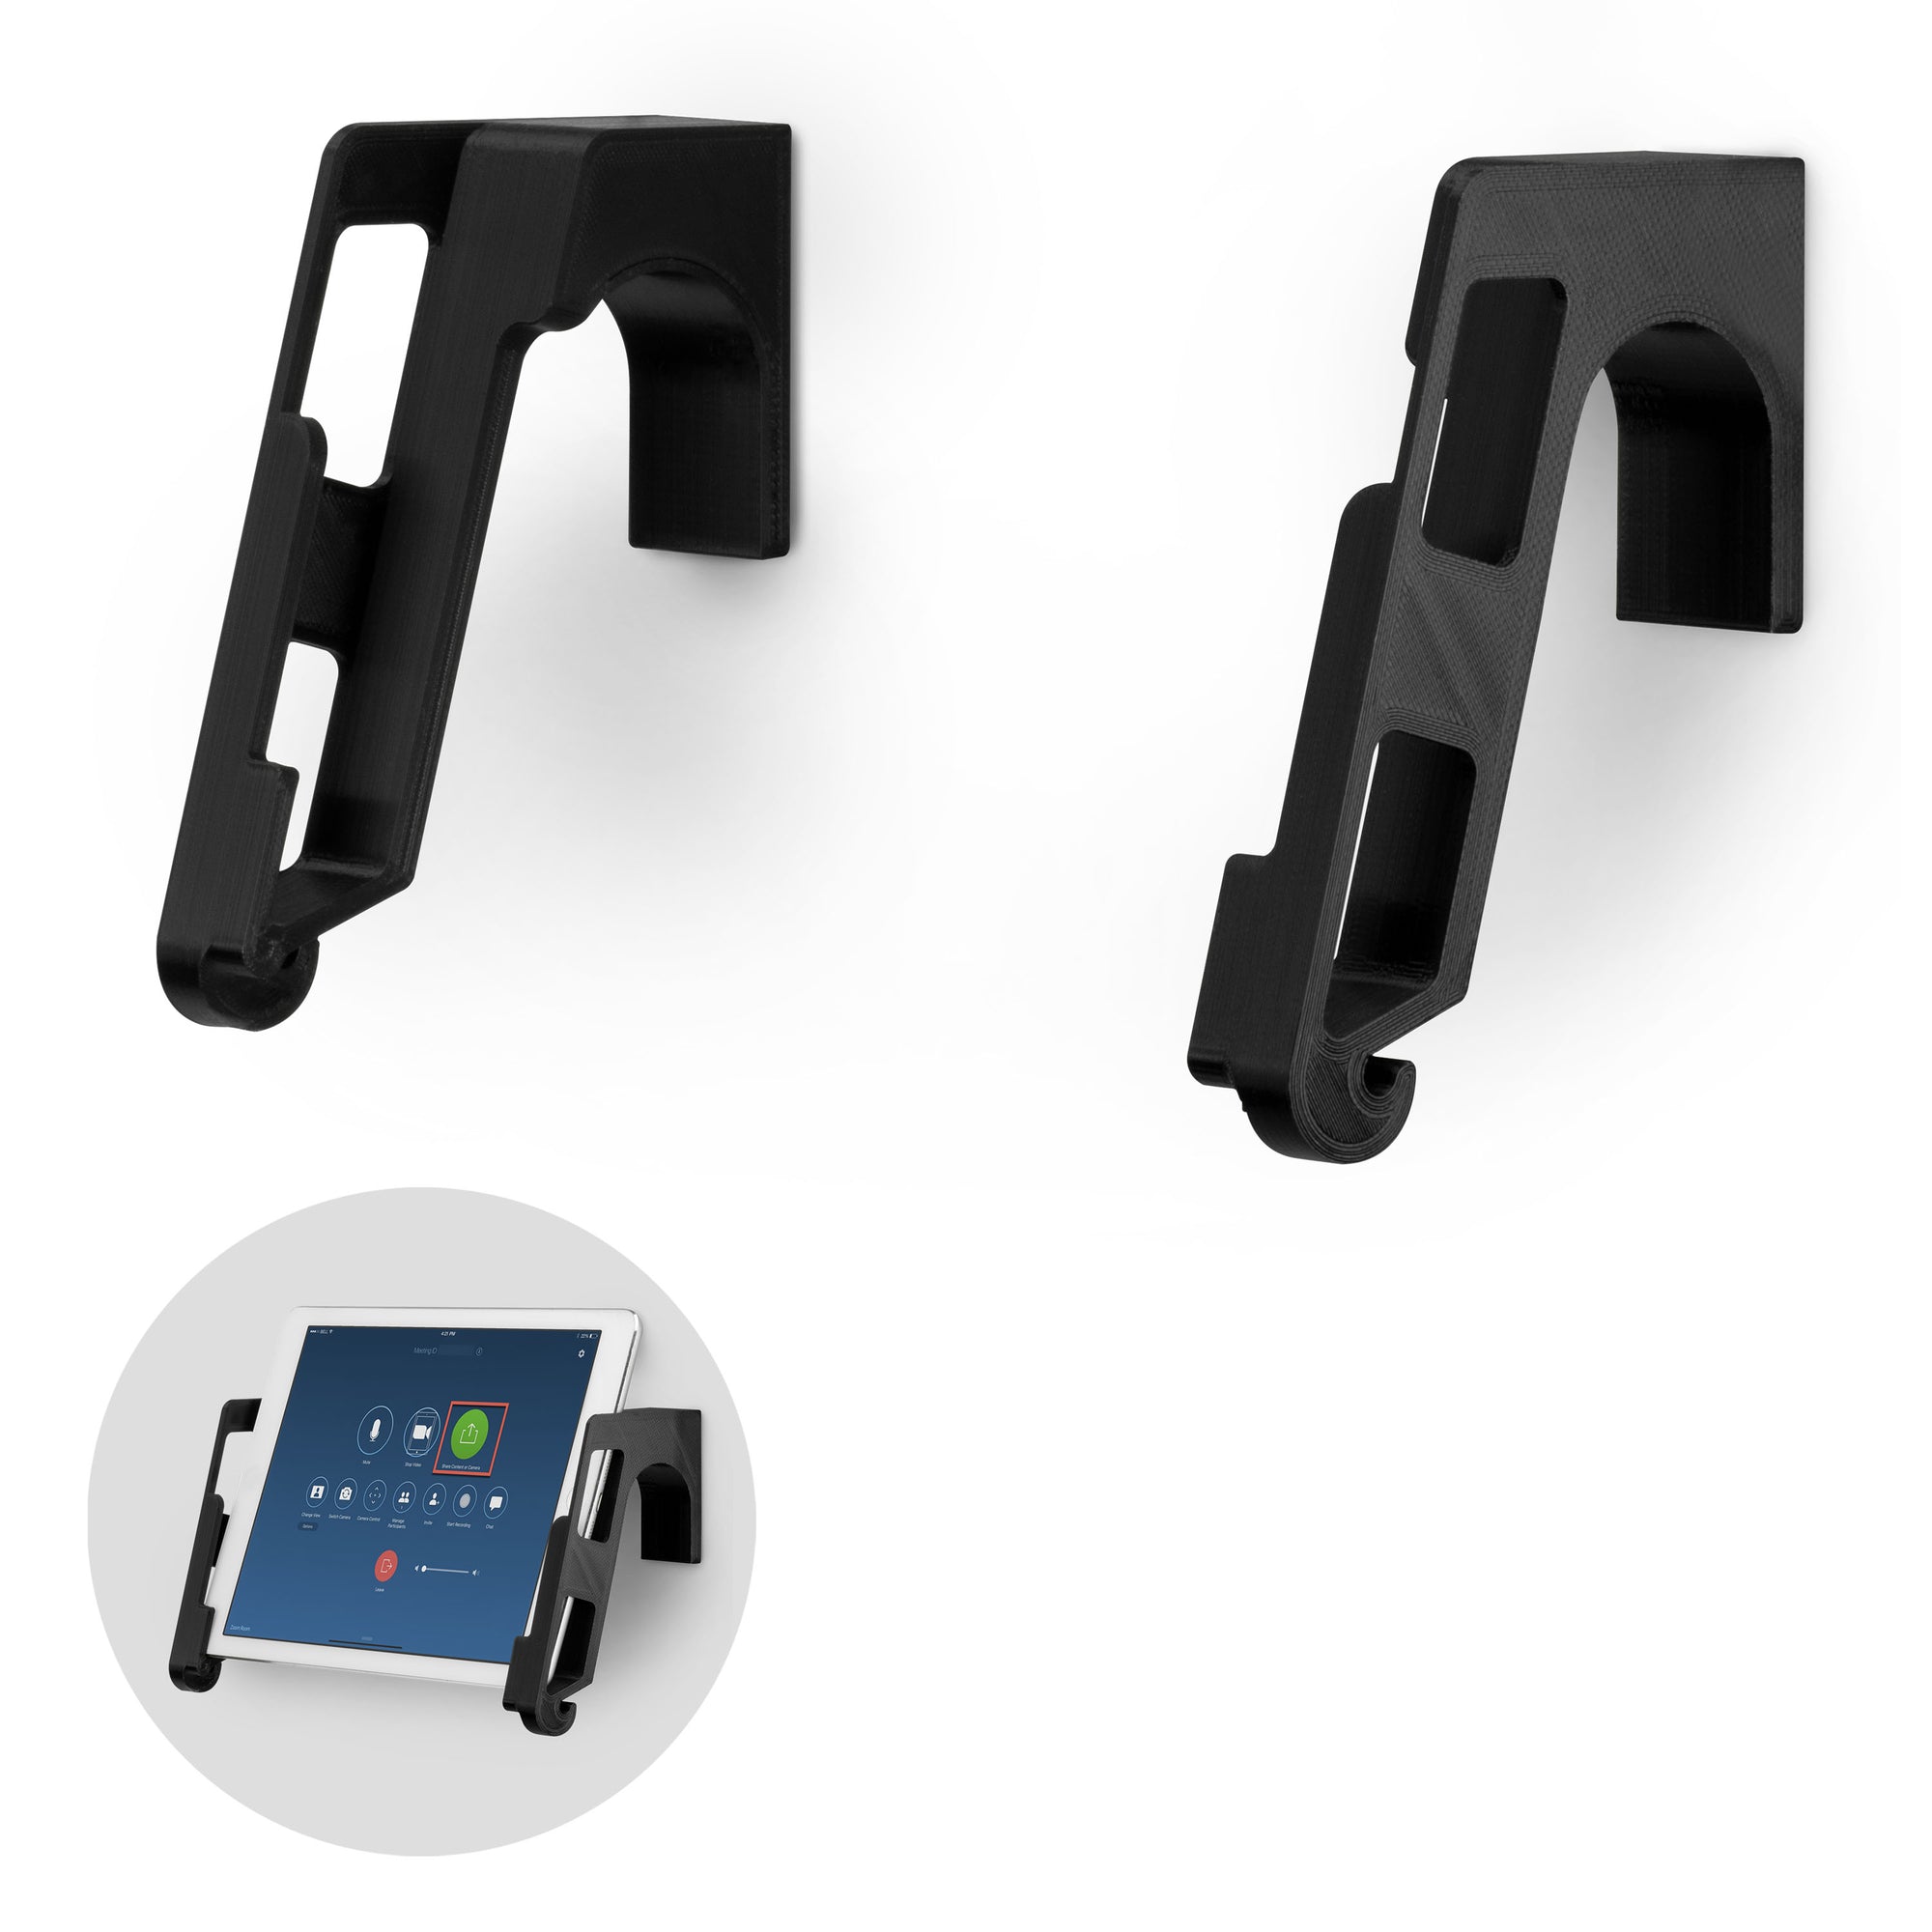 Universal Wall Mounted iPad and Android Tablet Stand Hanger Holder - TWM02